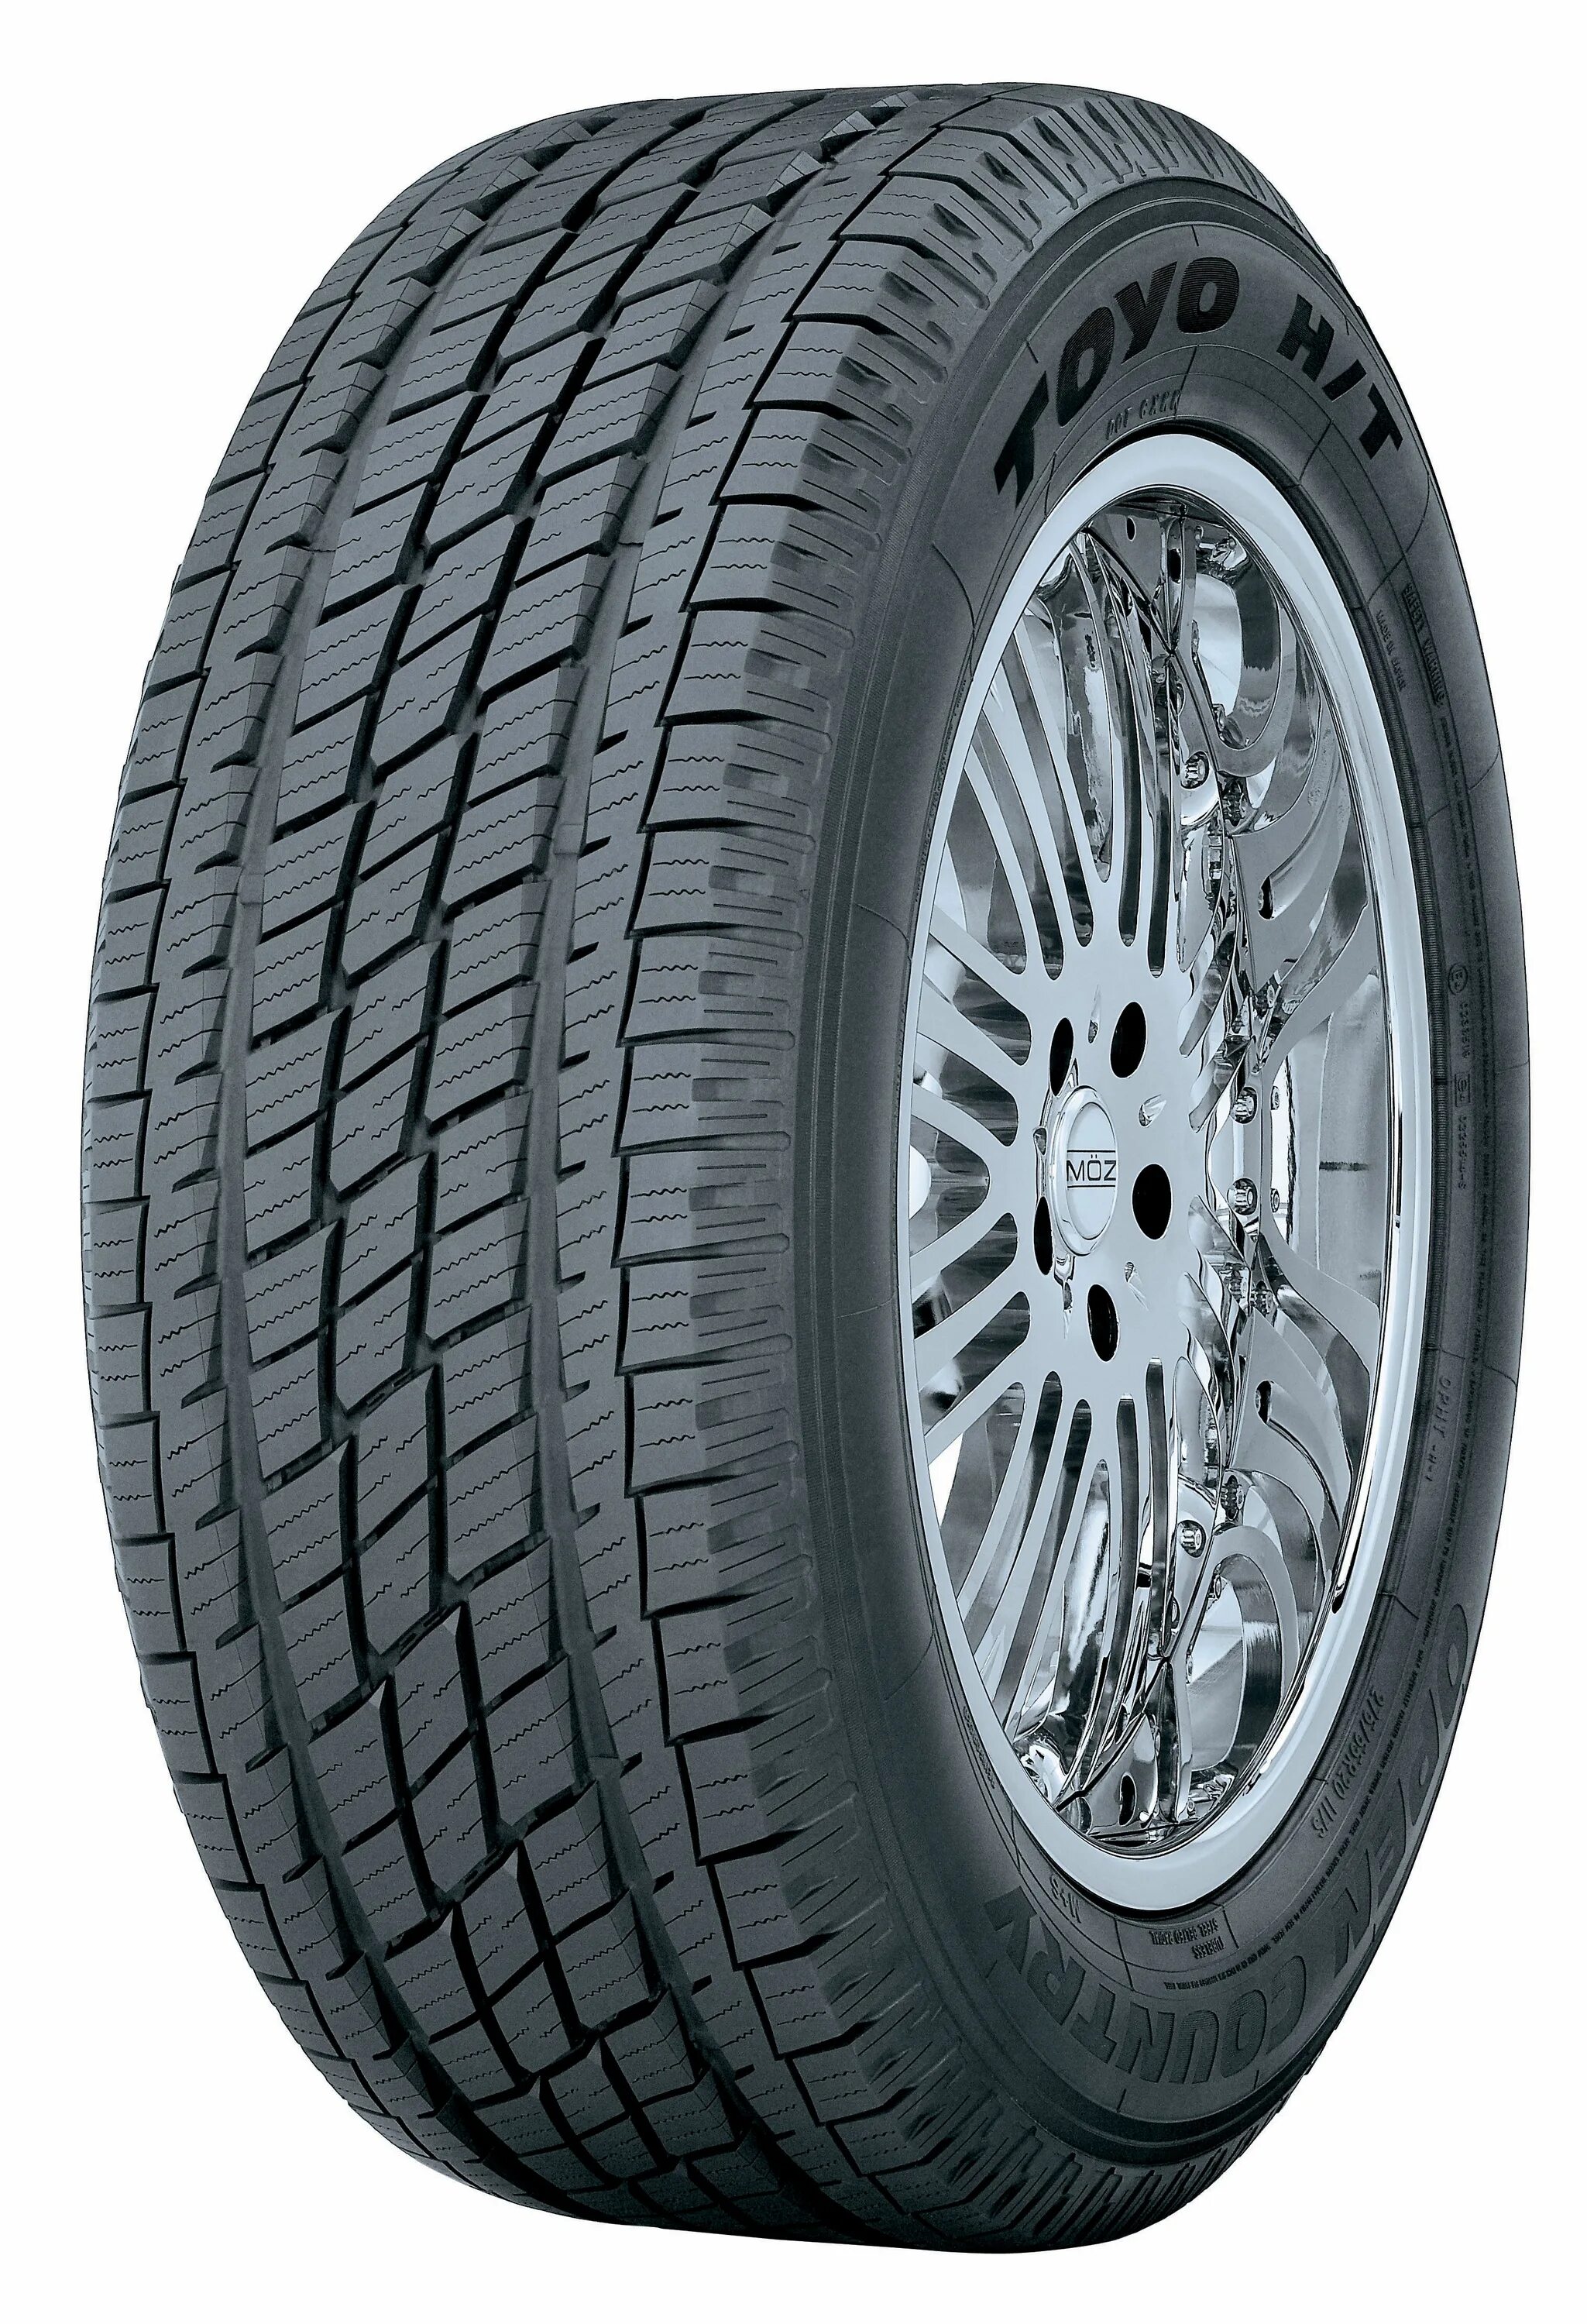 Toyo open Country h/t 235 65 17. 245/55r19 Toyo OPHT 103s. Toyo open Country h/t 265 65. Toyo open Country HT. Опен кантри шина